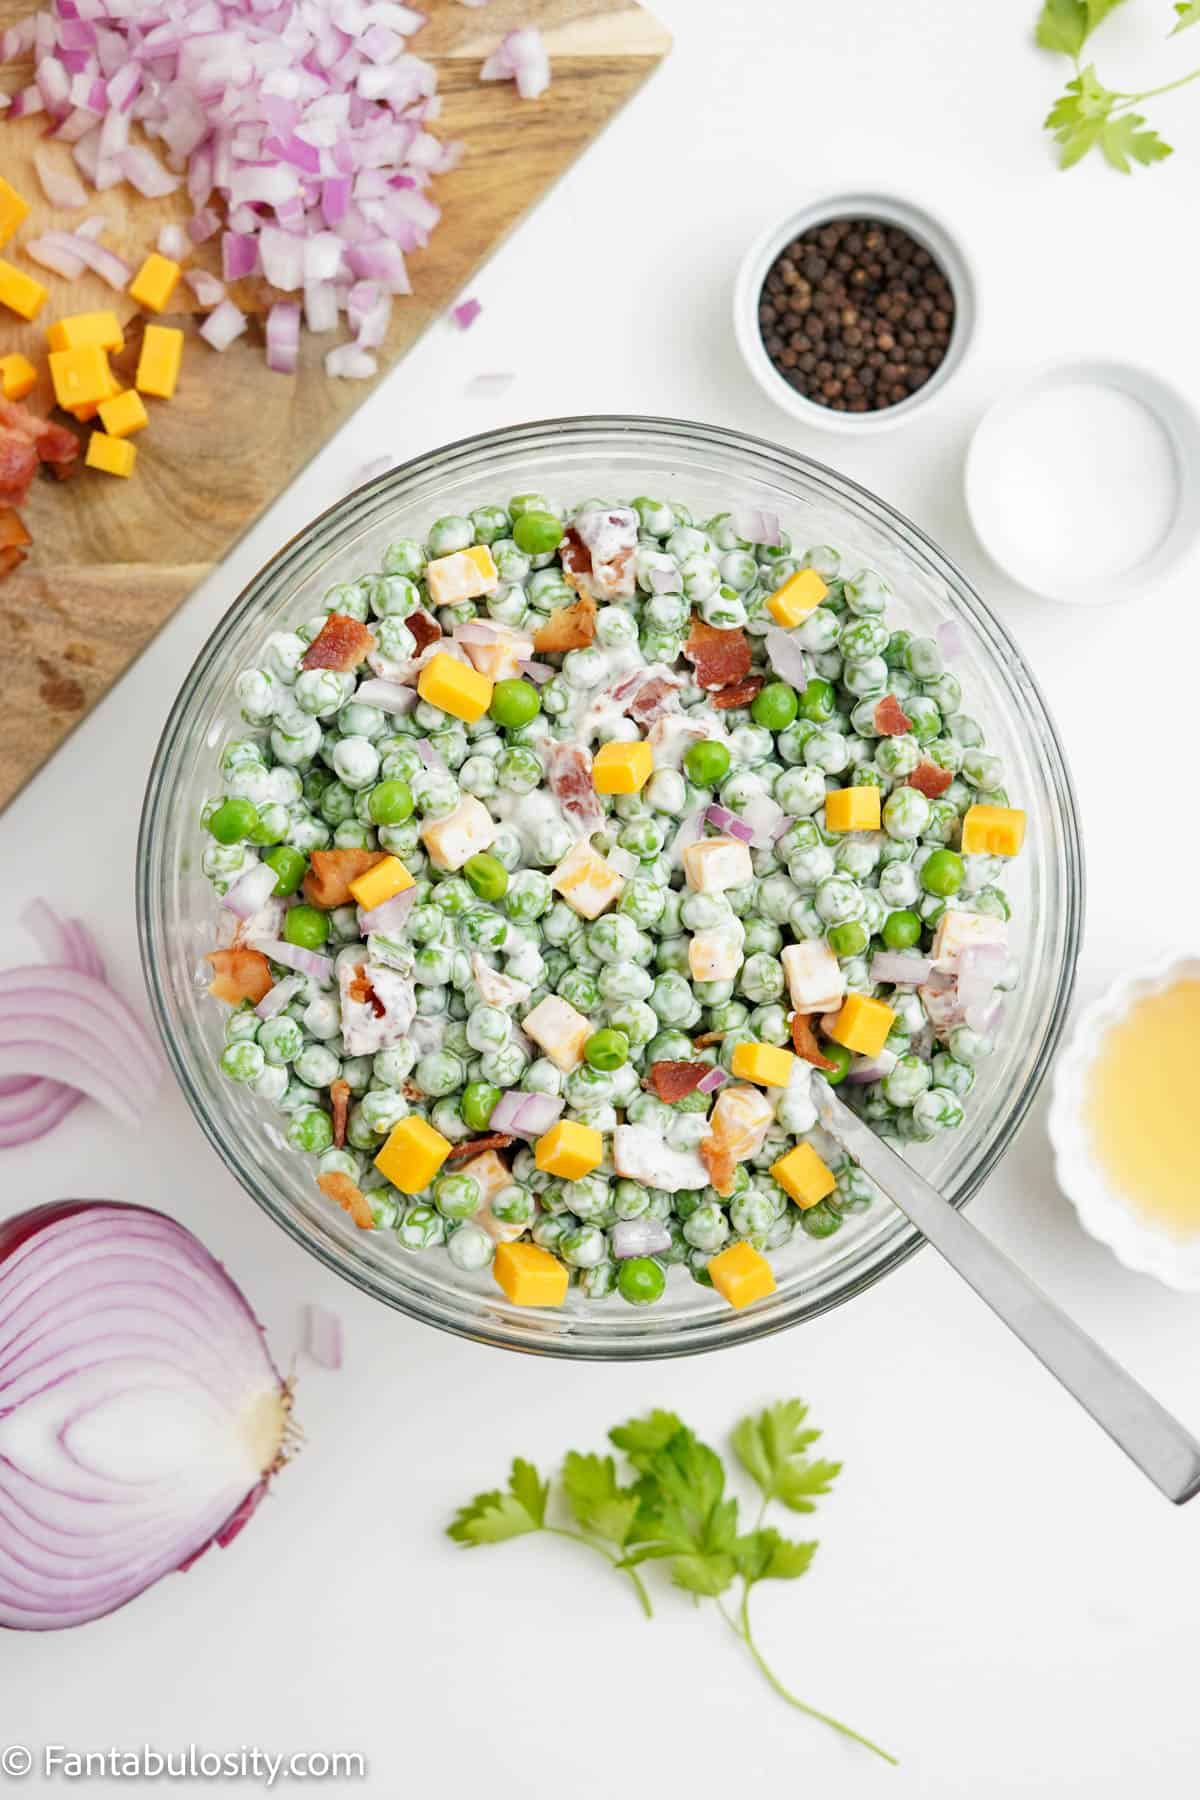 Pea salad being mixed together in a bowl.